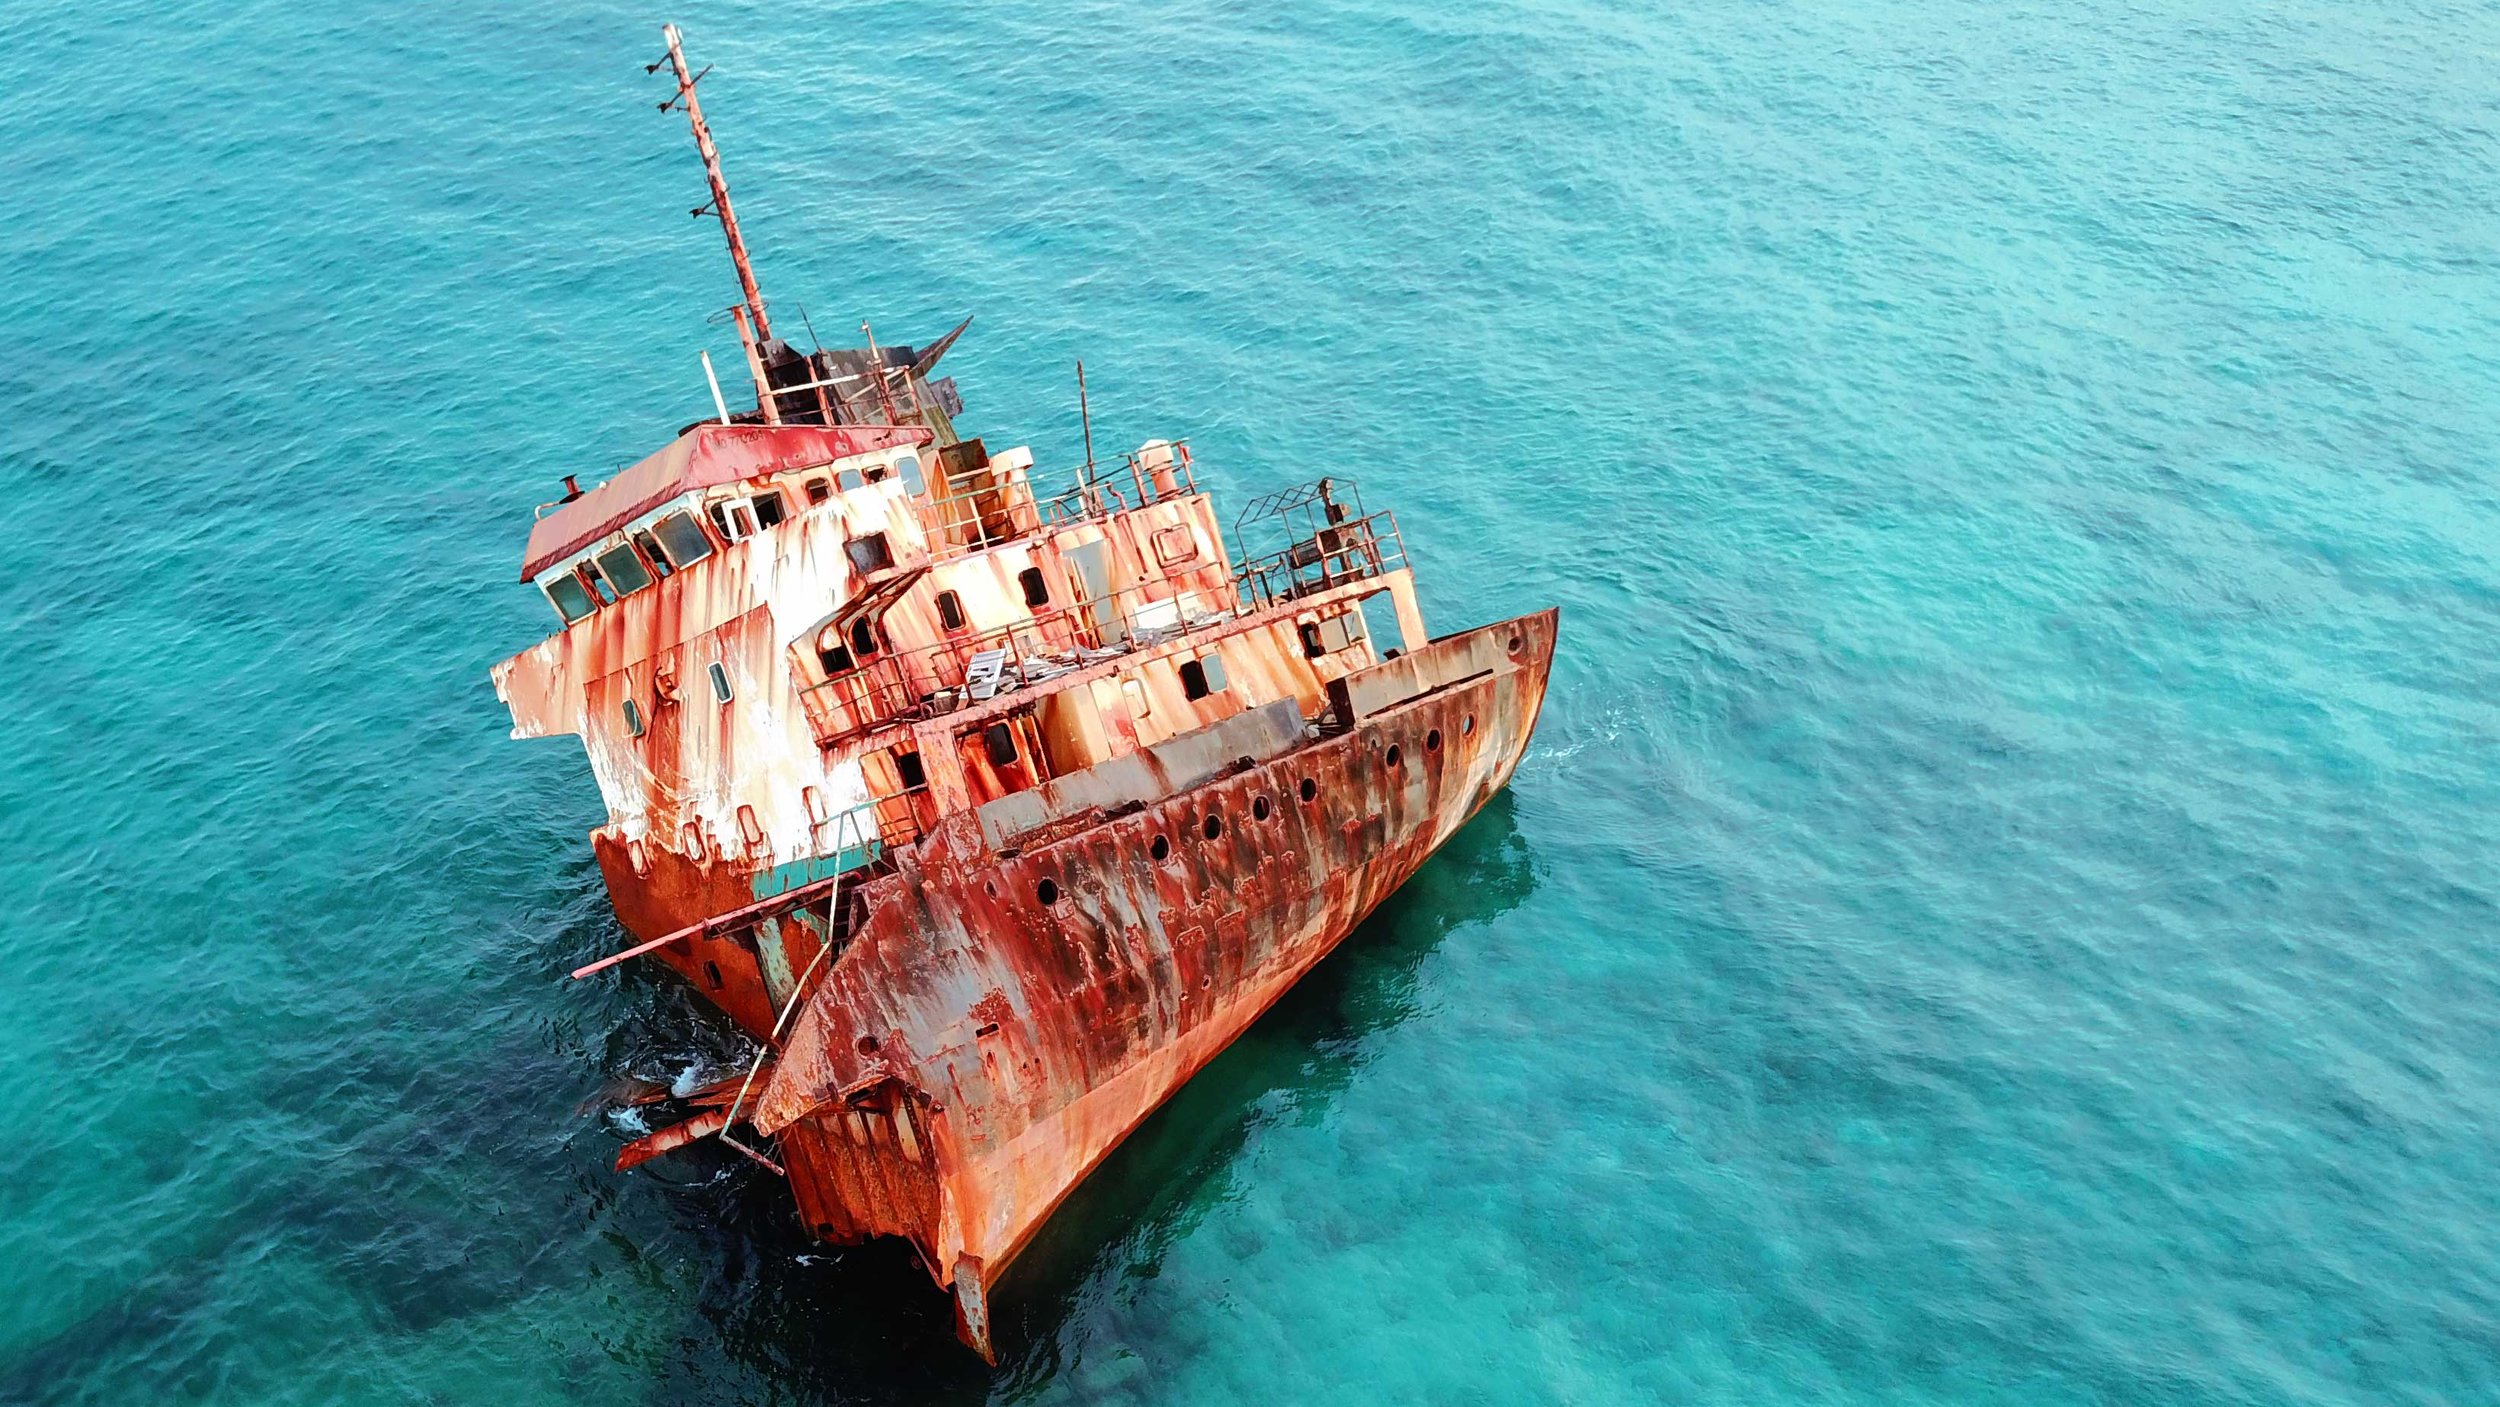 San_Andres_Colombia_Shipwreck_Drone_Aerial_Photography_Aidan_Lincoln_Fowler_1